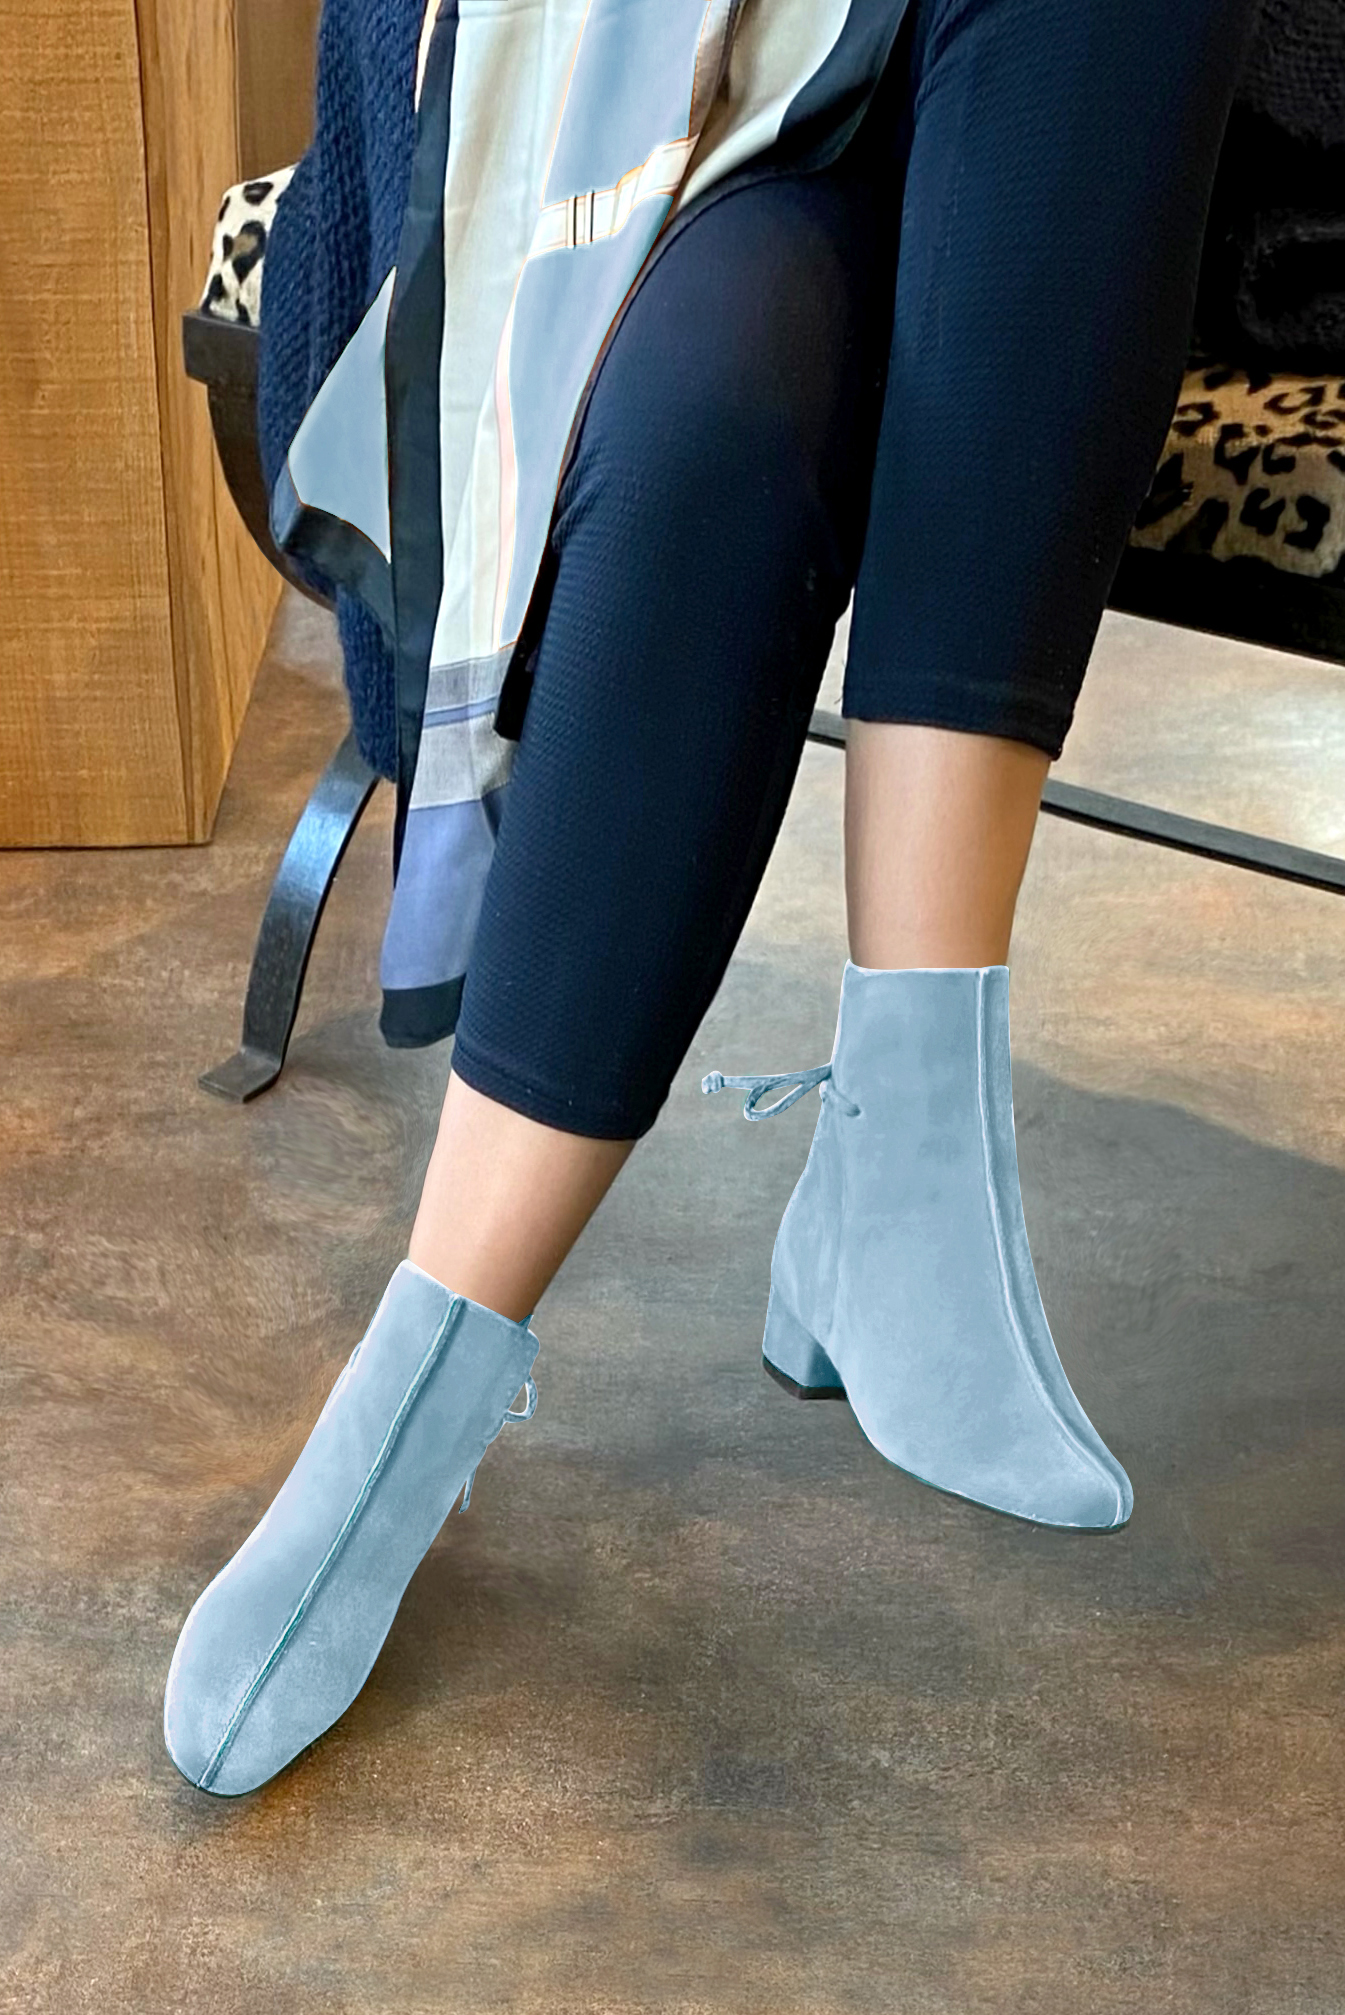 Sky blue women's ankle boots with laces at the back. Round toe. Low block heels. Worn view - Florence KOOIJMAN